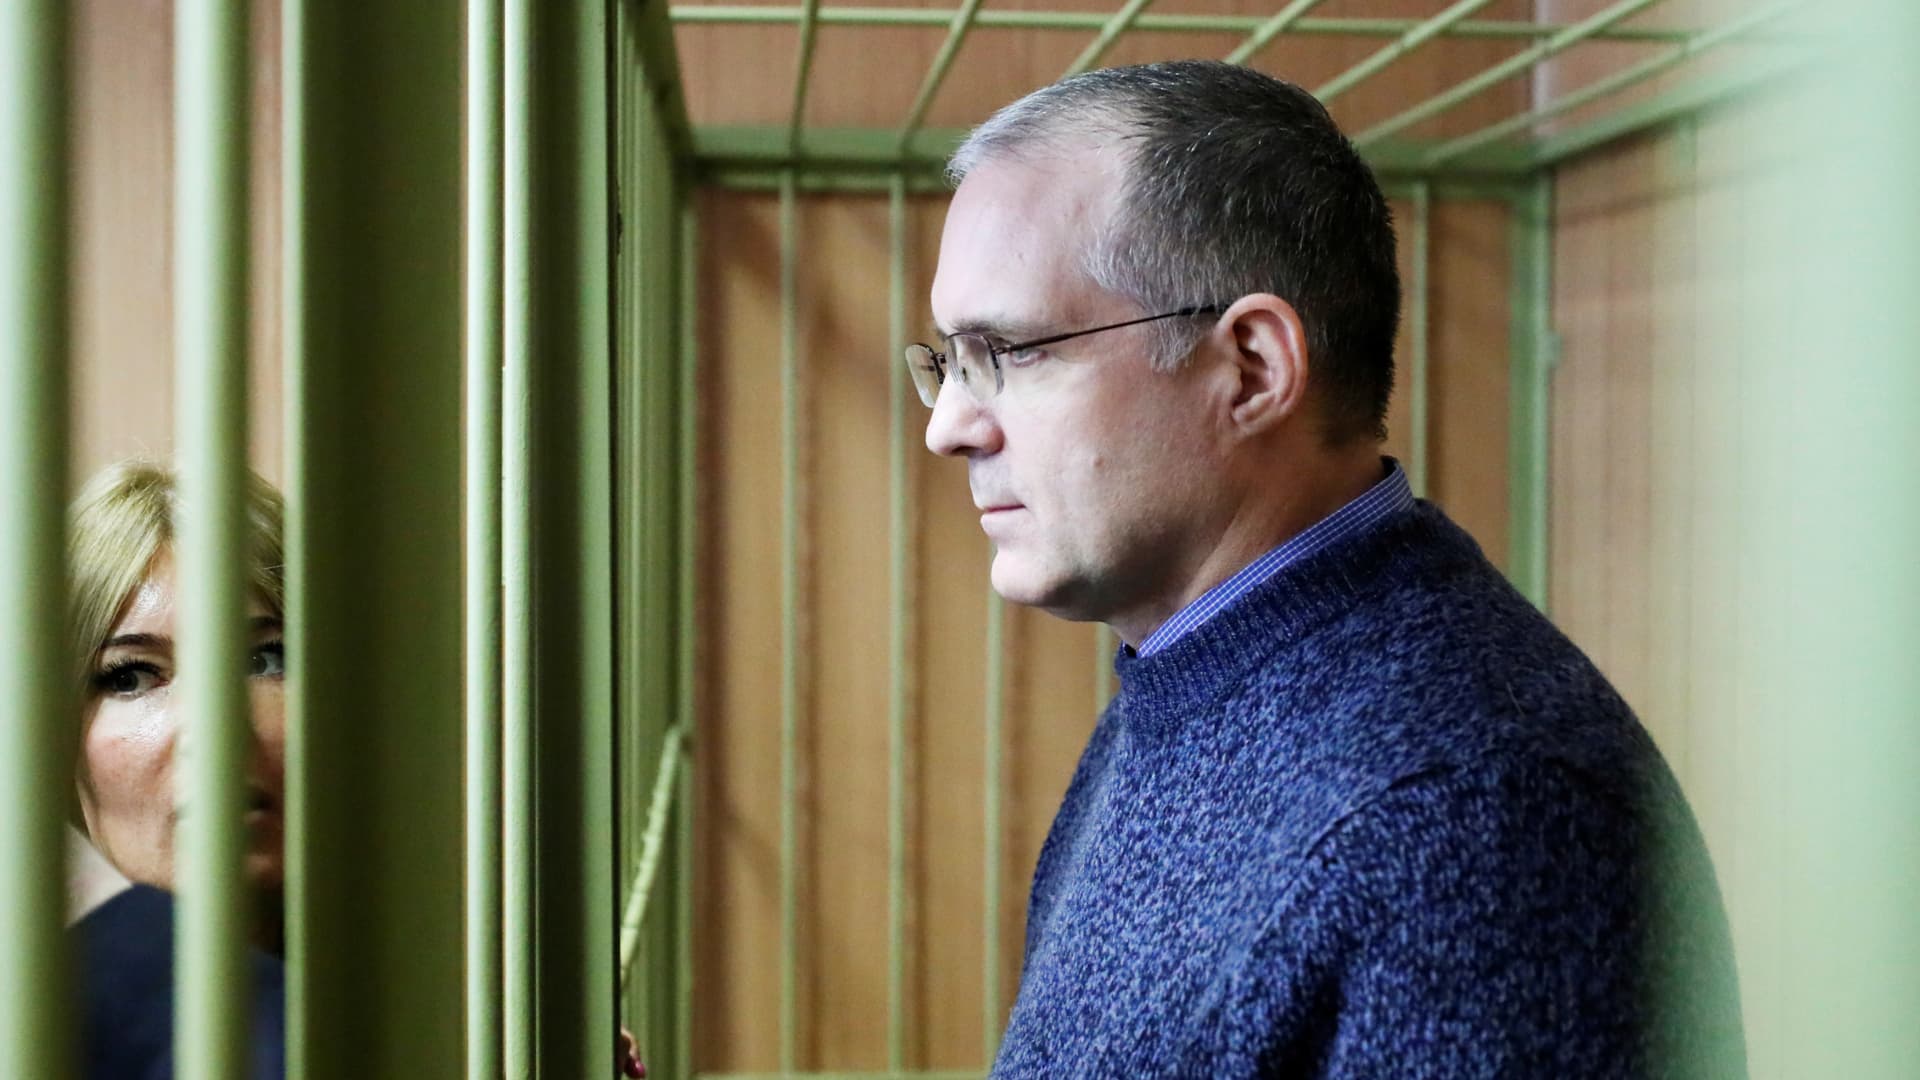 Former U.S. Marine Paul Whelan, who is being held on suspicion of spying, in the courtroom cage after a ruling regarding extension of his detention, in Moscow, Russia, Feb. 22, 2019.